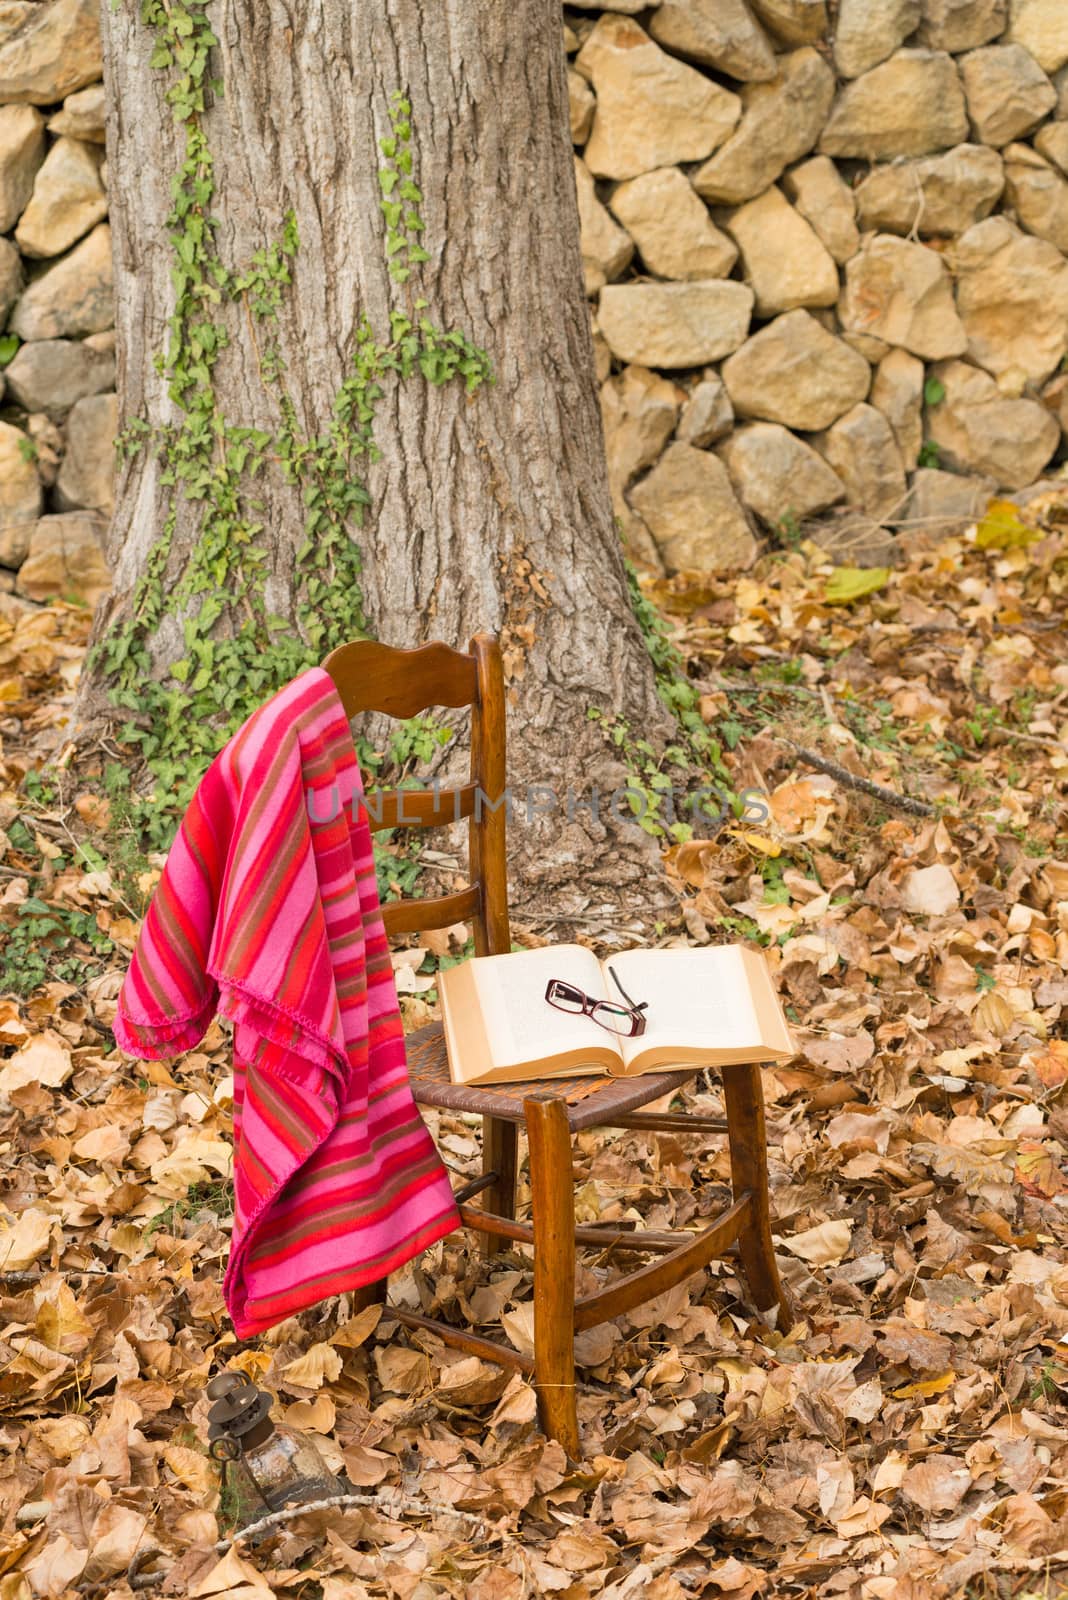 Chair and open book in an autumn setting